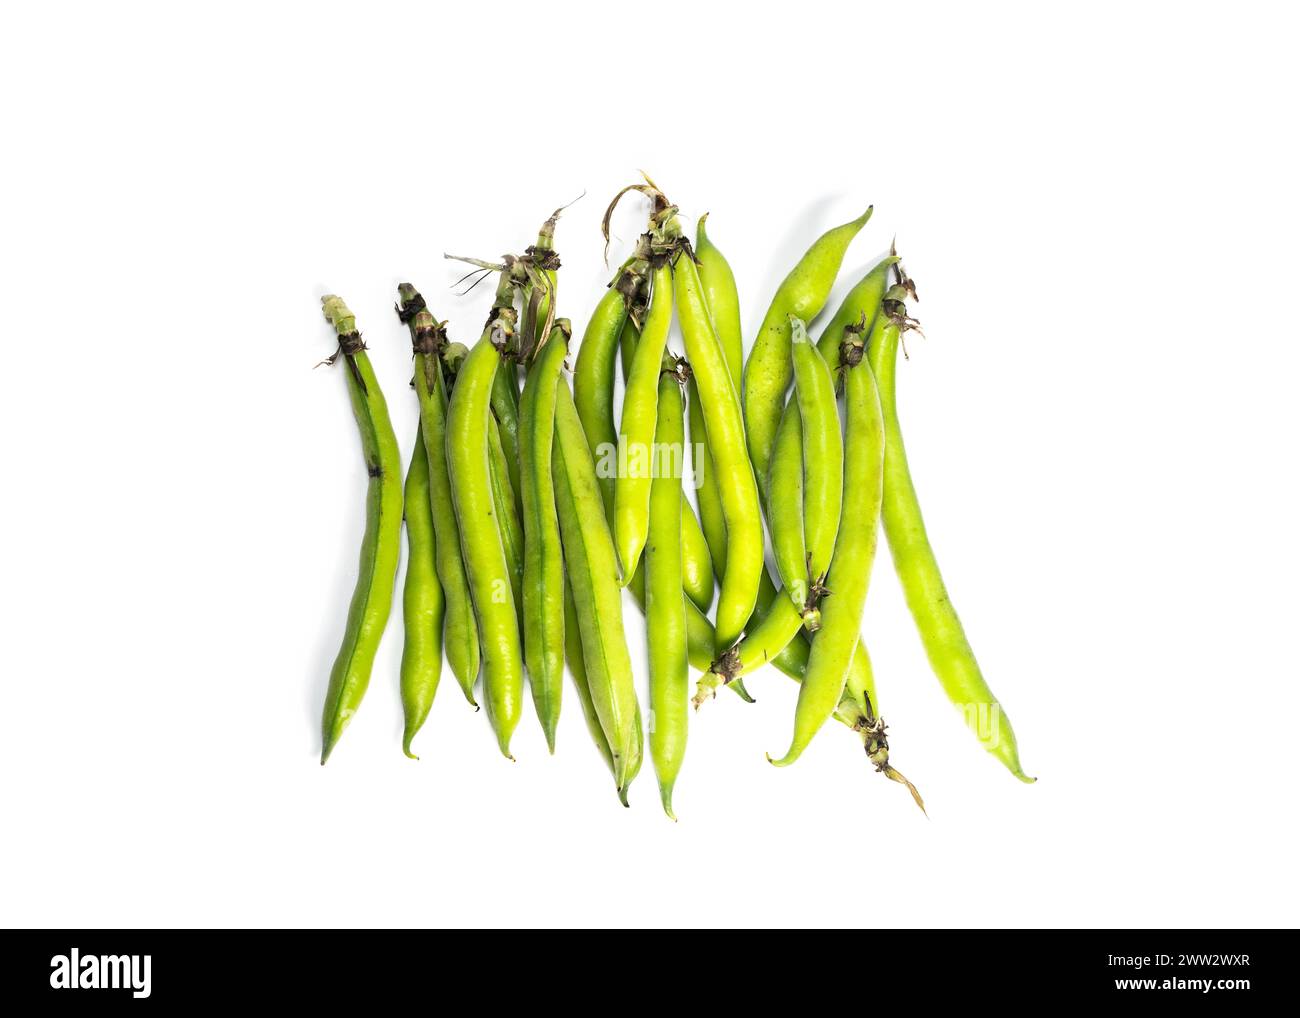 Broad Beans Isolated On White Background Stock Photo